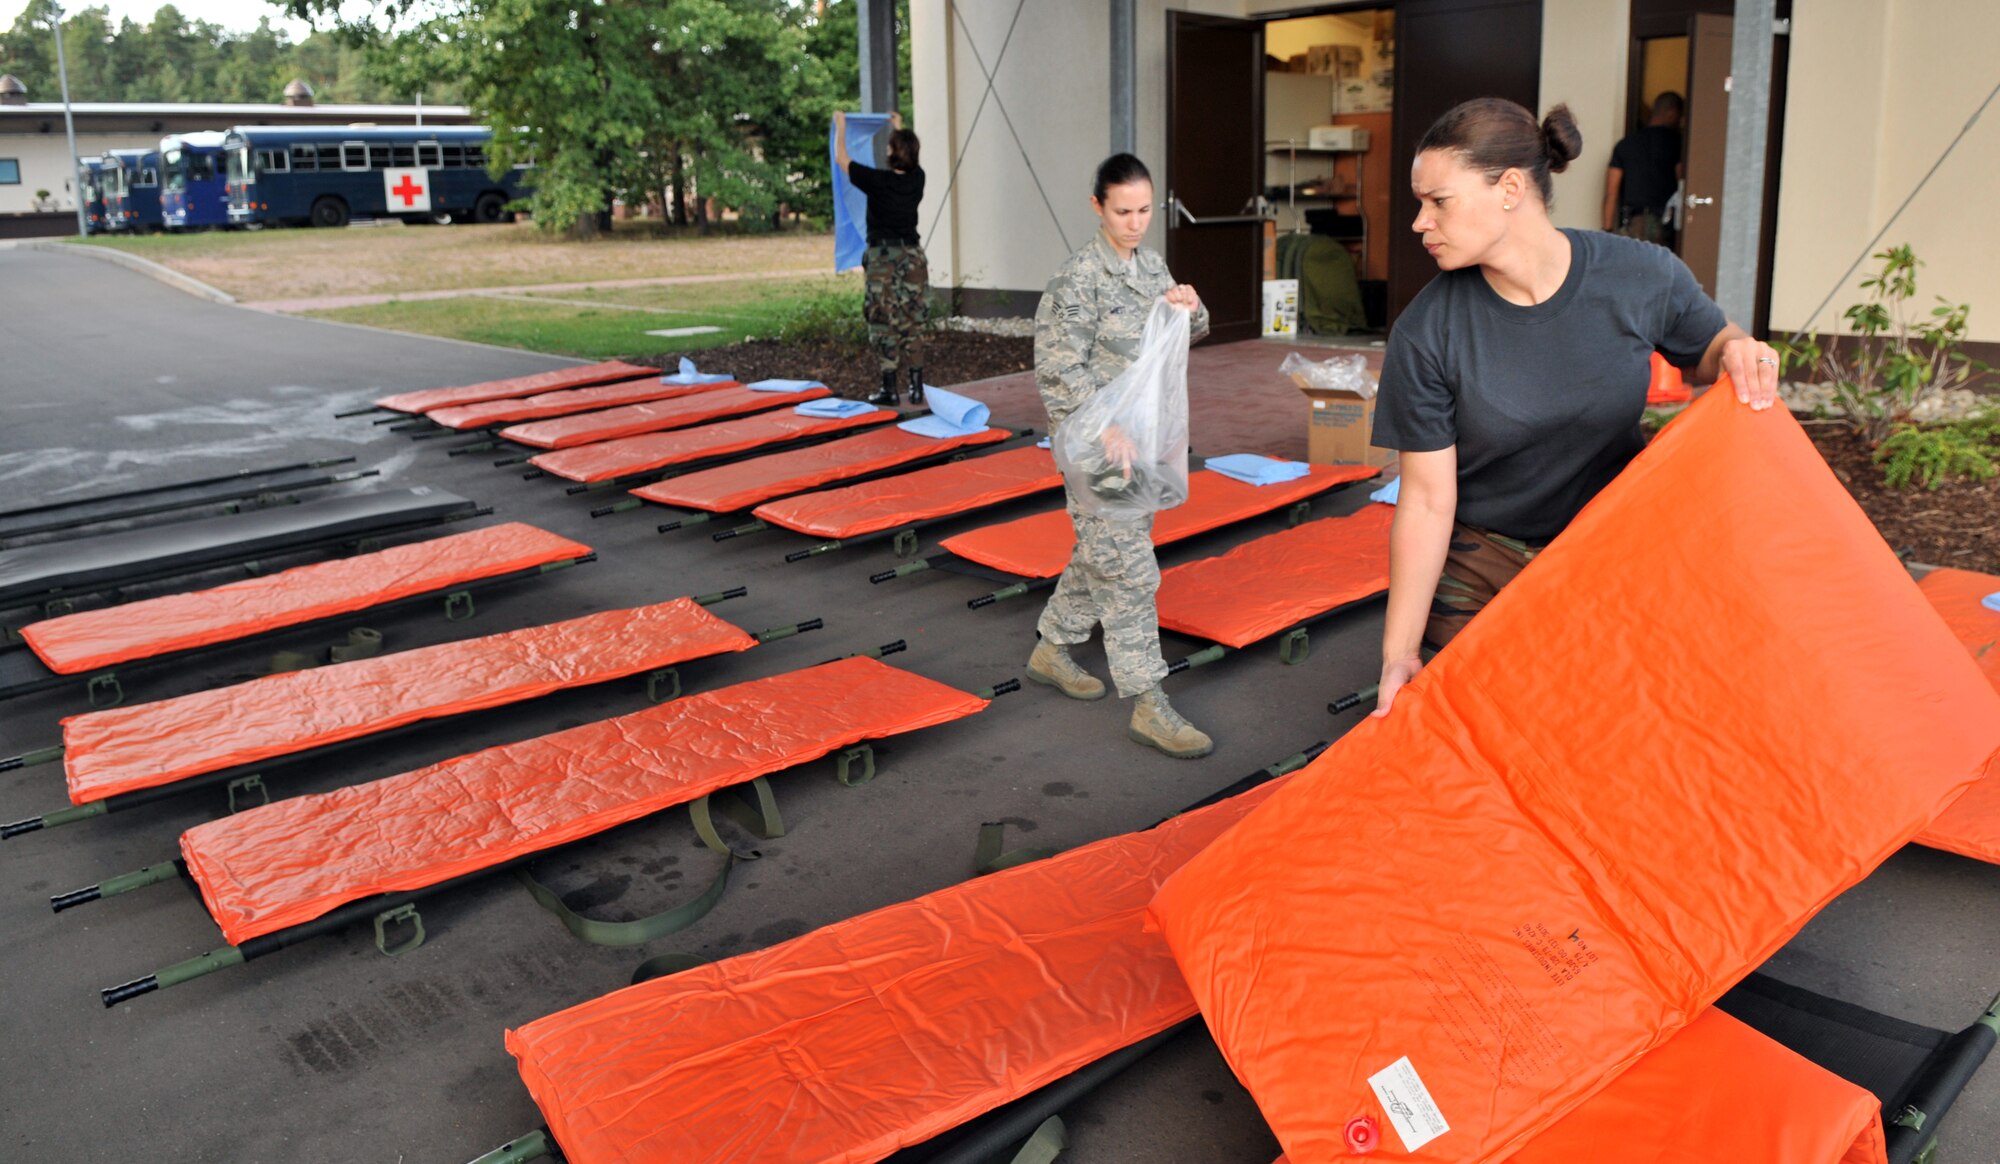 U.S. Air Force Tech. Sgt. Laura Small, 86th Contingency Aeromedical Staging Facility medical technician, places mats on gurneys, Ramstein Air Base, Germany, Aug. 27, 2009. The gurneys will be used to transport wounded warriors to an aircraft taking them to Walter Reed Army Medical Center for further medical treatment. (U.S. Air Force photo by Senior Airman Nathan Lipscomb)